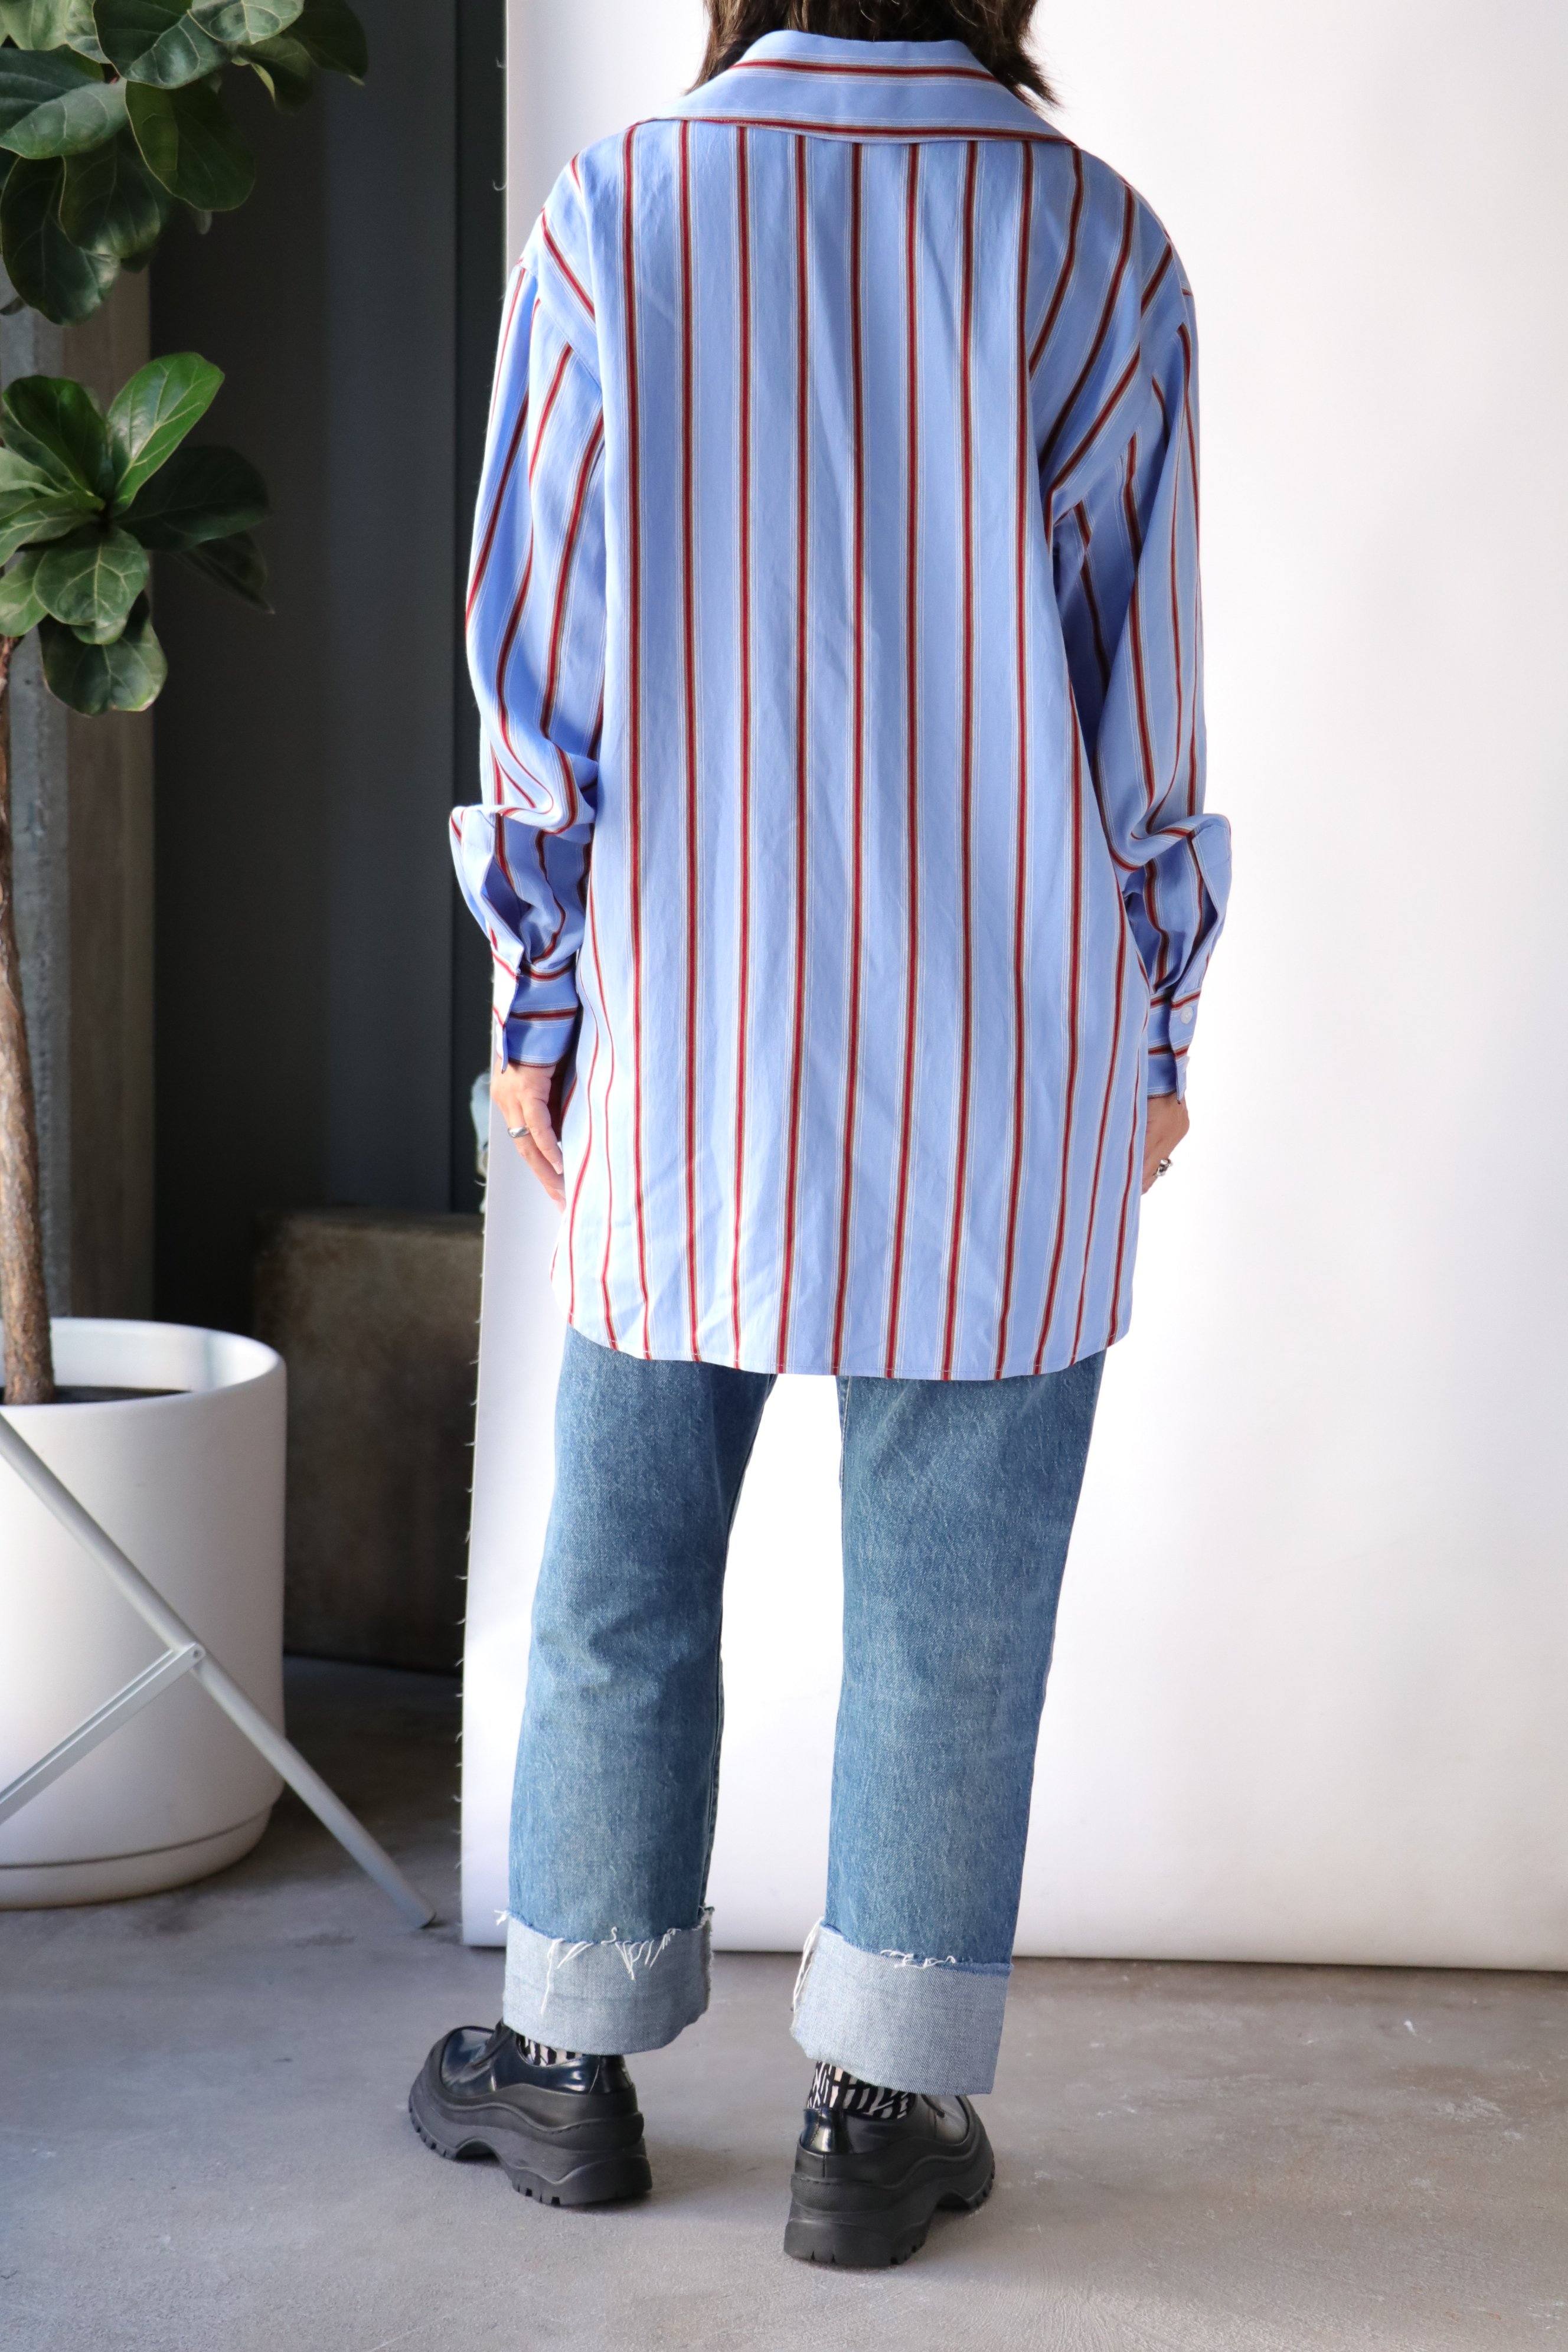 Smythe Over The Head Shirt in French Blue/Burgundy Stripe